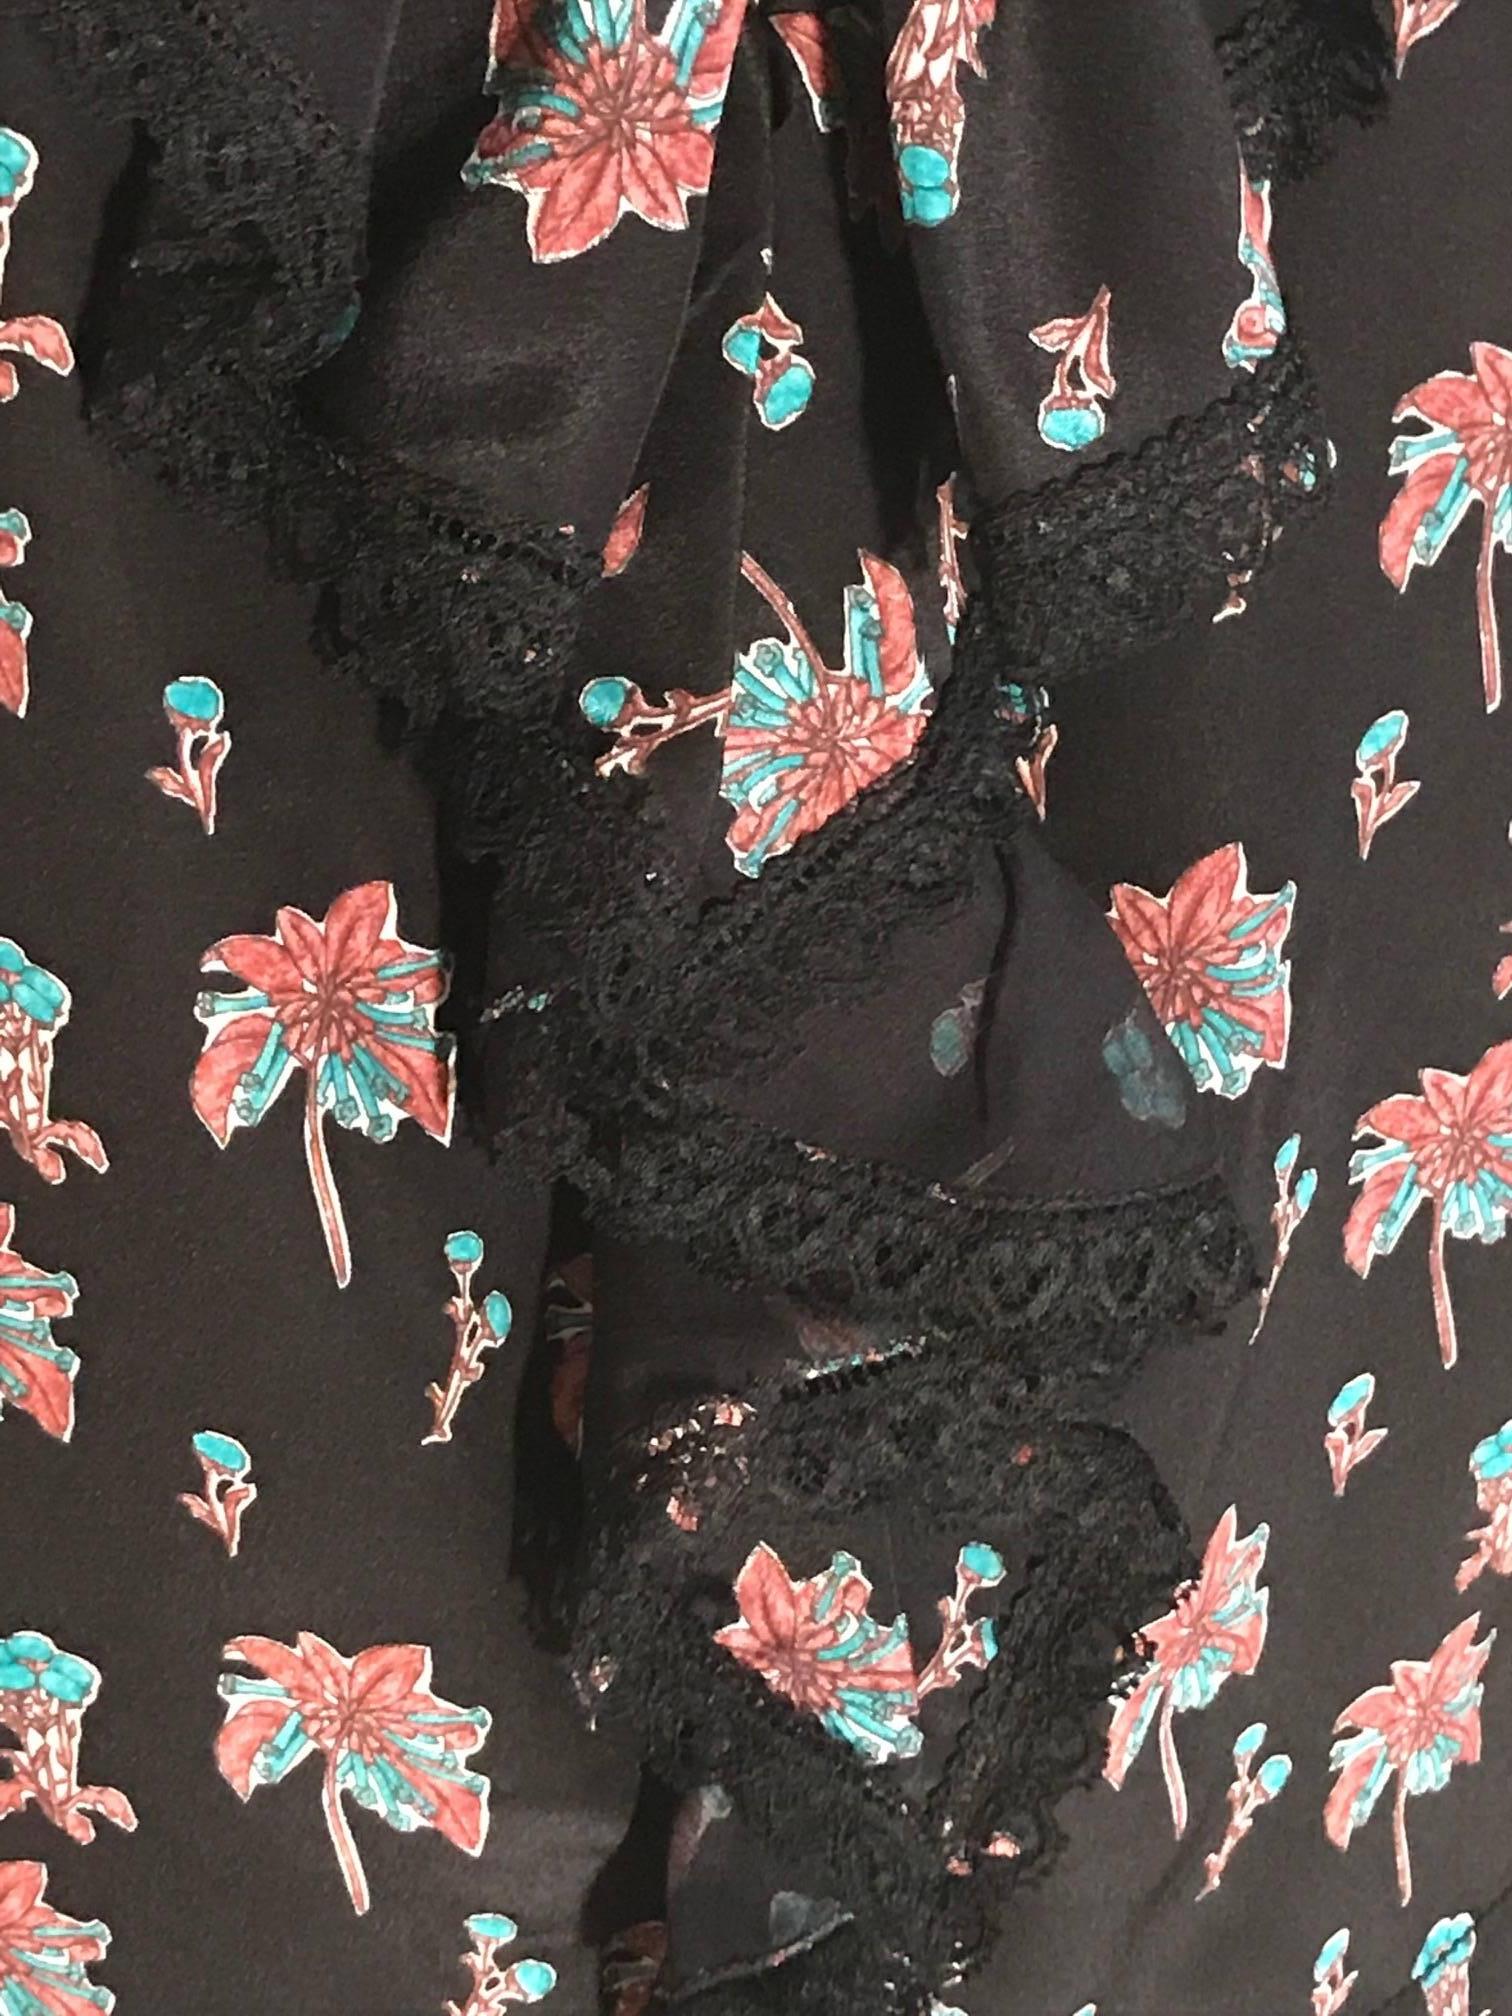 Prada Palm Tree Print Black Silk Top In Excellent Condition For Sale In San Francisco, CA